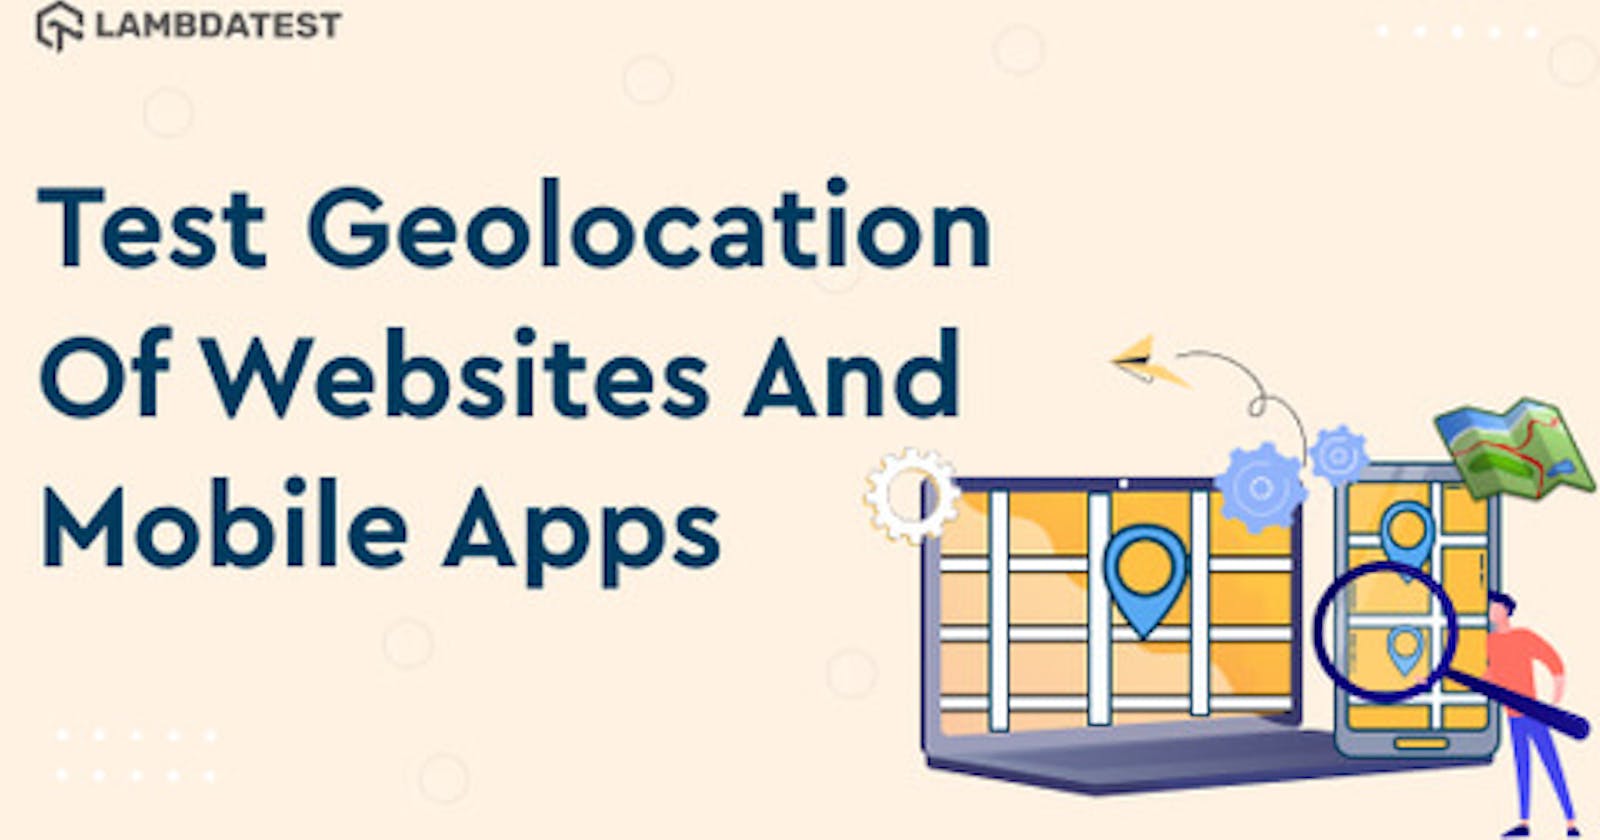 How To Test Geolocation Of Websites And Mobile Apps